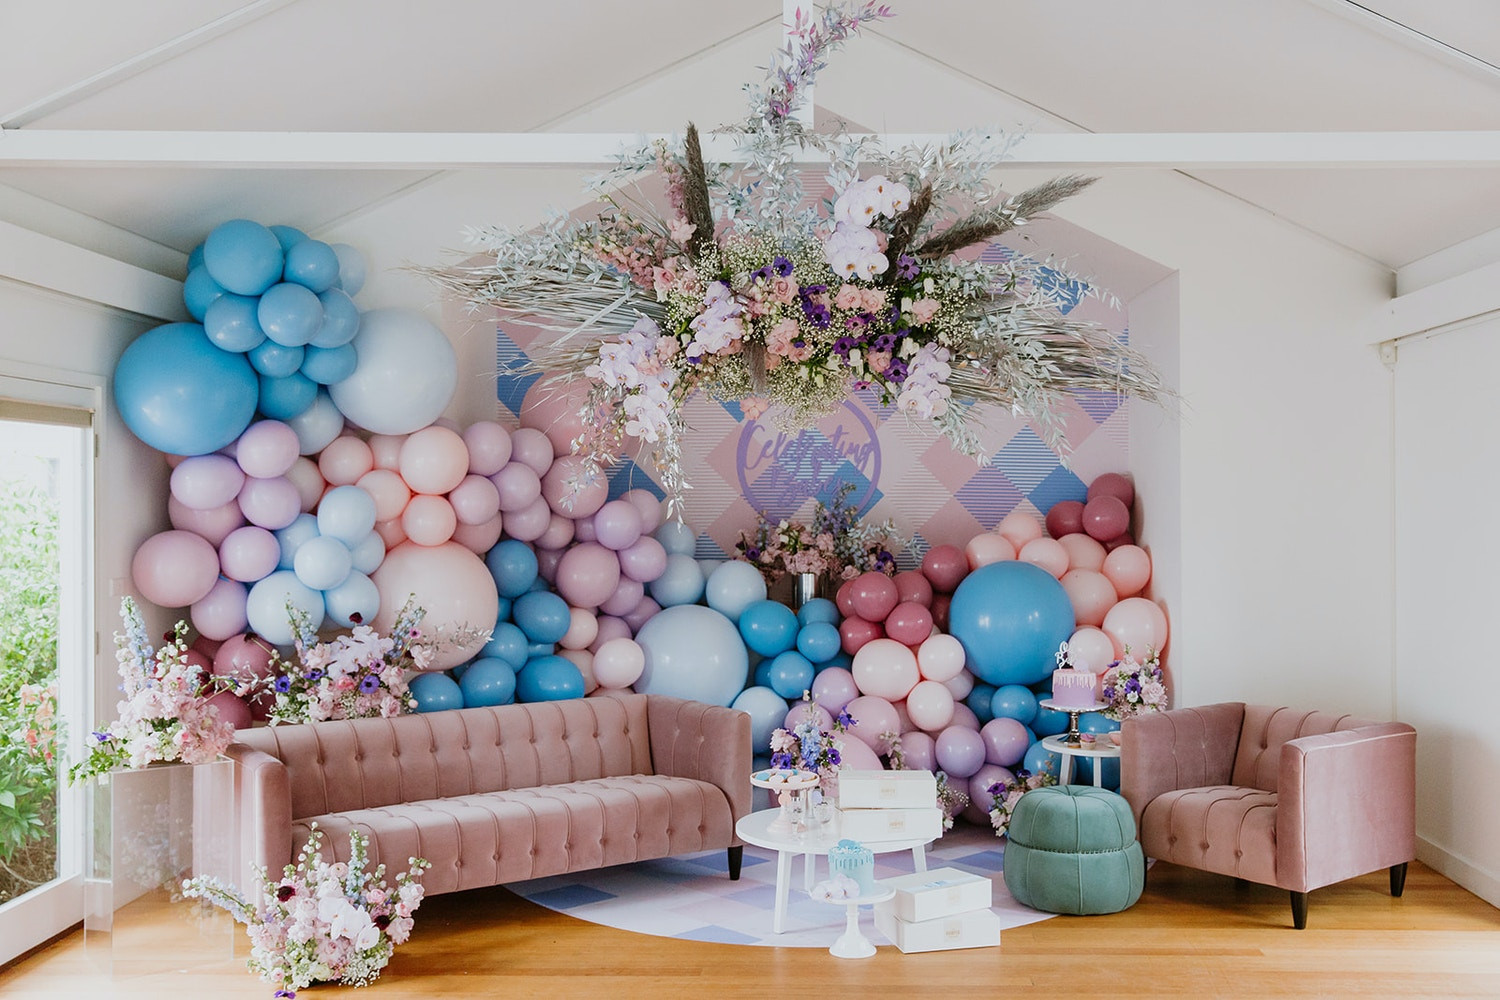 Gender Reveal Theme Party Ideas
 A muted pastel gender reveal party – unique gender reveal